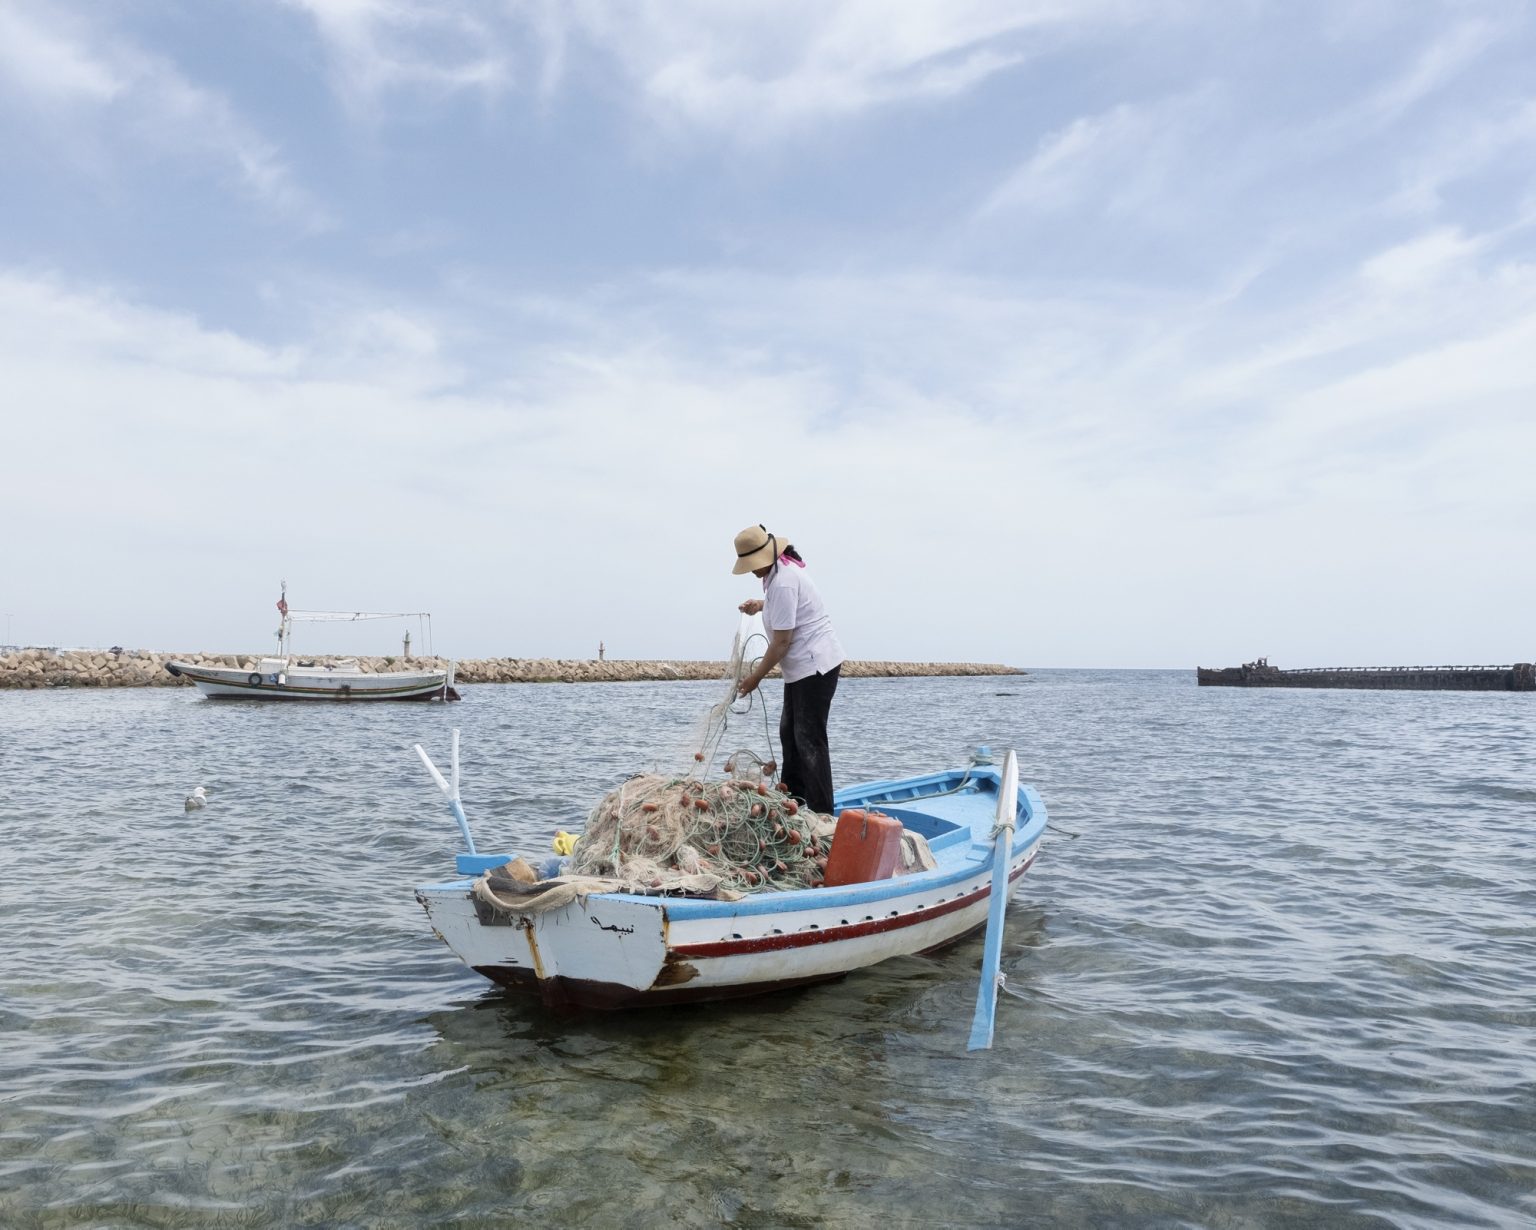 Kerkennah Islands (Tunisia), June 2022 - Sara Souissi is a fisherwoman from the island, she goes out to sea every day with her rowing boat. Her nets are filled almost exclusively with the blue crab, an invasive alien species from the Red Sea, nicknamed 'Daesh' by fishermen because of its devastating impact on the marine ecosystem and on fishing nets that are cut by the power of the claws and the spines around them. Forced to buy back the nets several times a year, Sara is supported by the COSPE Onlus through the FAIRE project for the creation of economic opportunities for the women of the island (alternatives or complementary to fishing in the sea or on foot). She doesn't earn much from the sale of the crab: while shrimp can be sold between 25 and 40 dinars per kg, the blue crab is worth about 2 dinars per kg.
><
Isole Kerkennah (Tunisia), giugno 2022 - Sara Souissi è una pescatrice dellisola, esce in mare tutti i giorni con la sua barca a remi. Le sue reti si riempiono quasi solo del granchio blu, una specie aliena invasiva proveniente dal Mar Rosso, soprannominata dai pescatori Daesh a causa del suo impatto devastante sullecosistema marino e sulle reti da pesca che vengono tagliate dalle potenza delle chele e dalle spine presenti attorno ad esse. Costretta a ricomprare le reti più volte lanno, Sara è sostenuta dalla Onlus COSPE attraverso il progetto FAIRE per la creazione di opportunità economiche per le donne dellisola (alternative o complementari alla pesca in mare o a piedi). Dalla vendita del granchio non ottiene molto: mentre i gamberi possono essere venduti tra i 25 e i 40 dinari al kg, il granchio blu vale circa 2 dinari al kg.